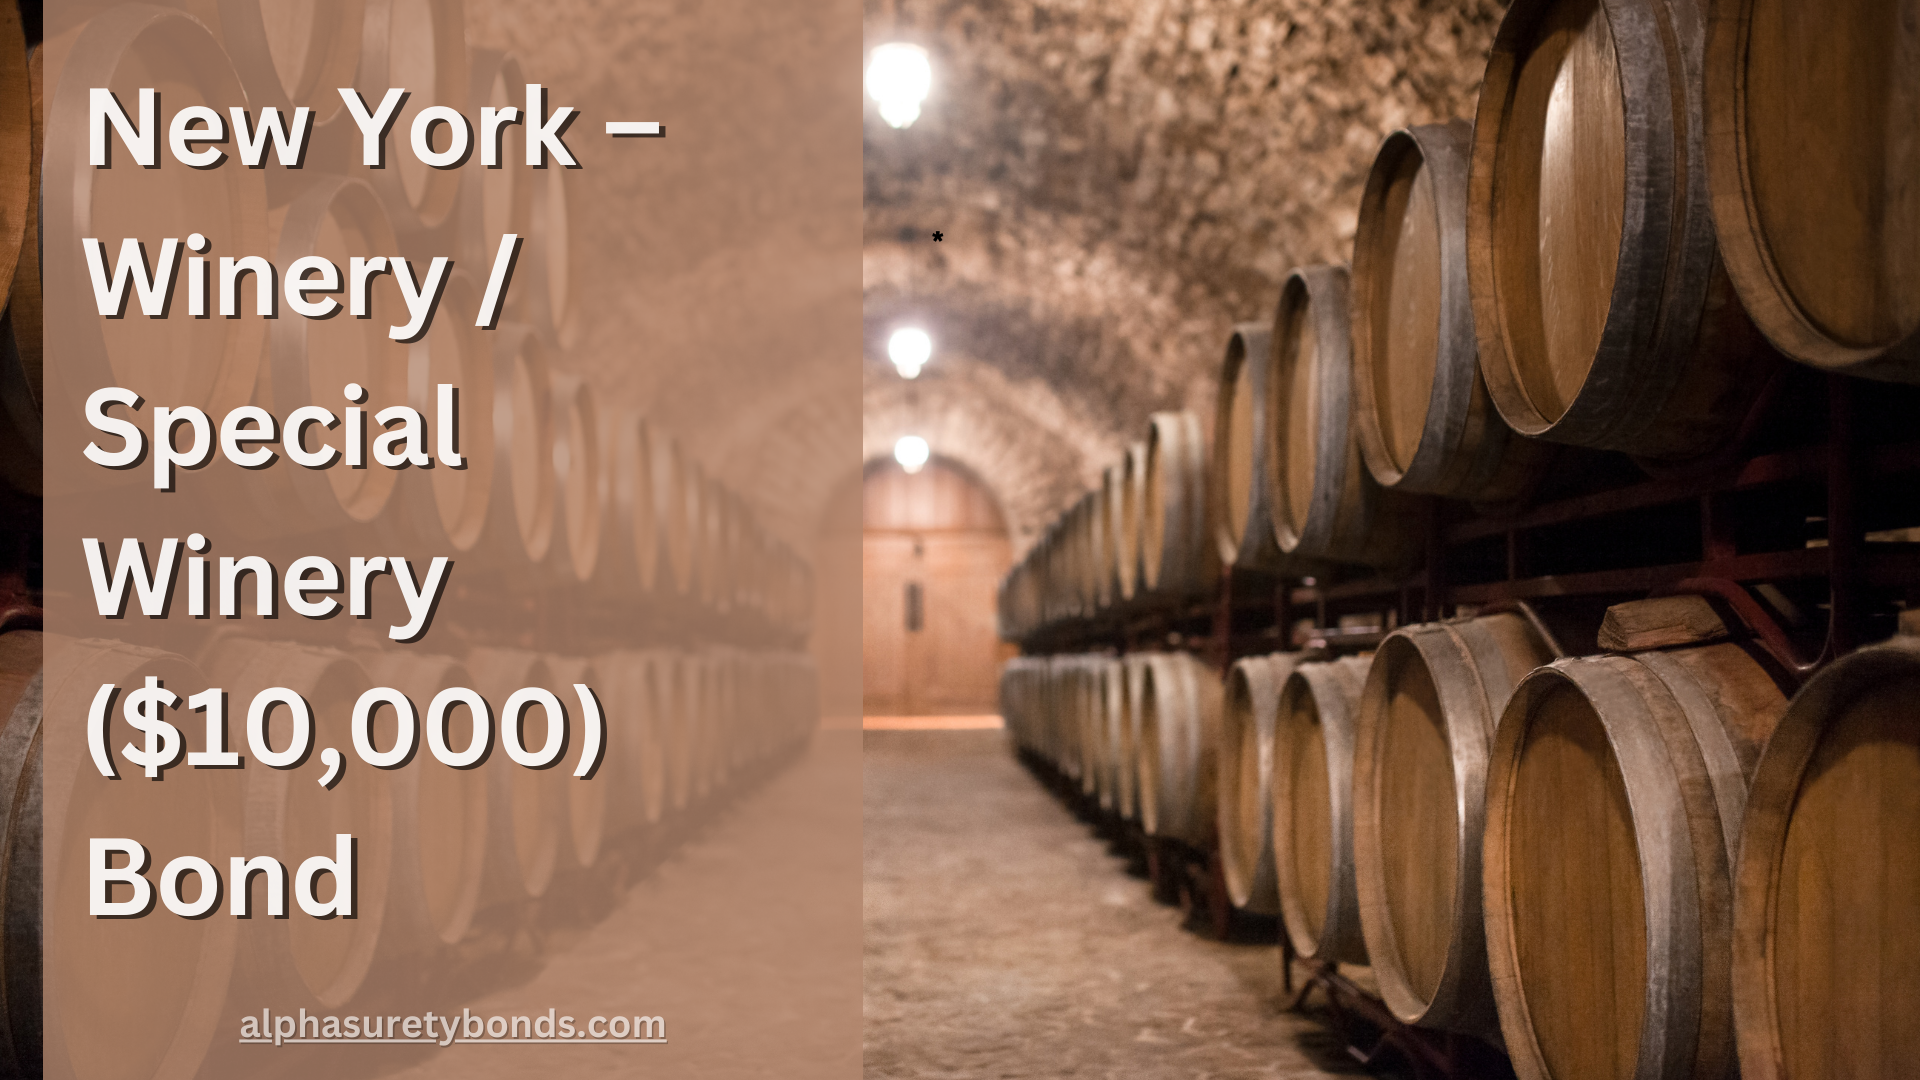 New York – Winery Special Winery ($10,000) Bond